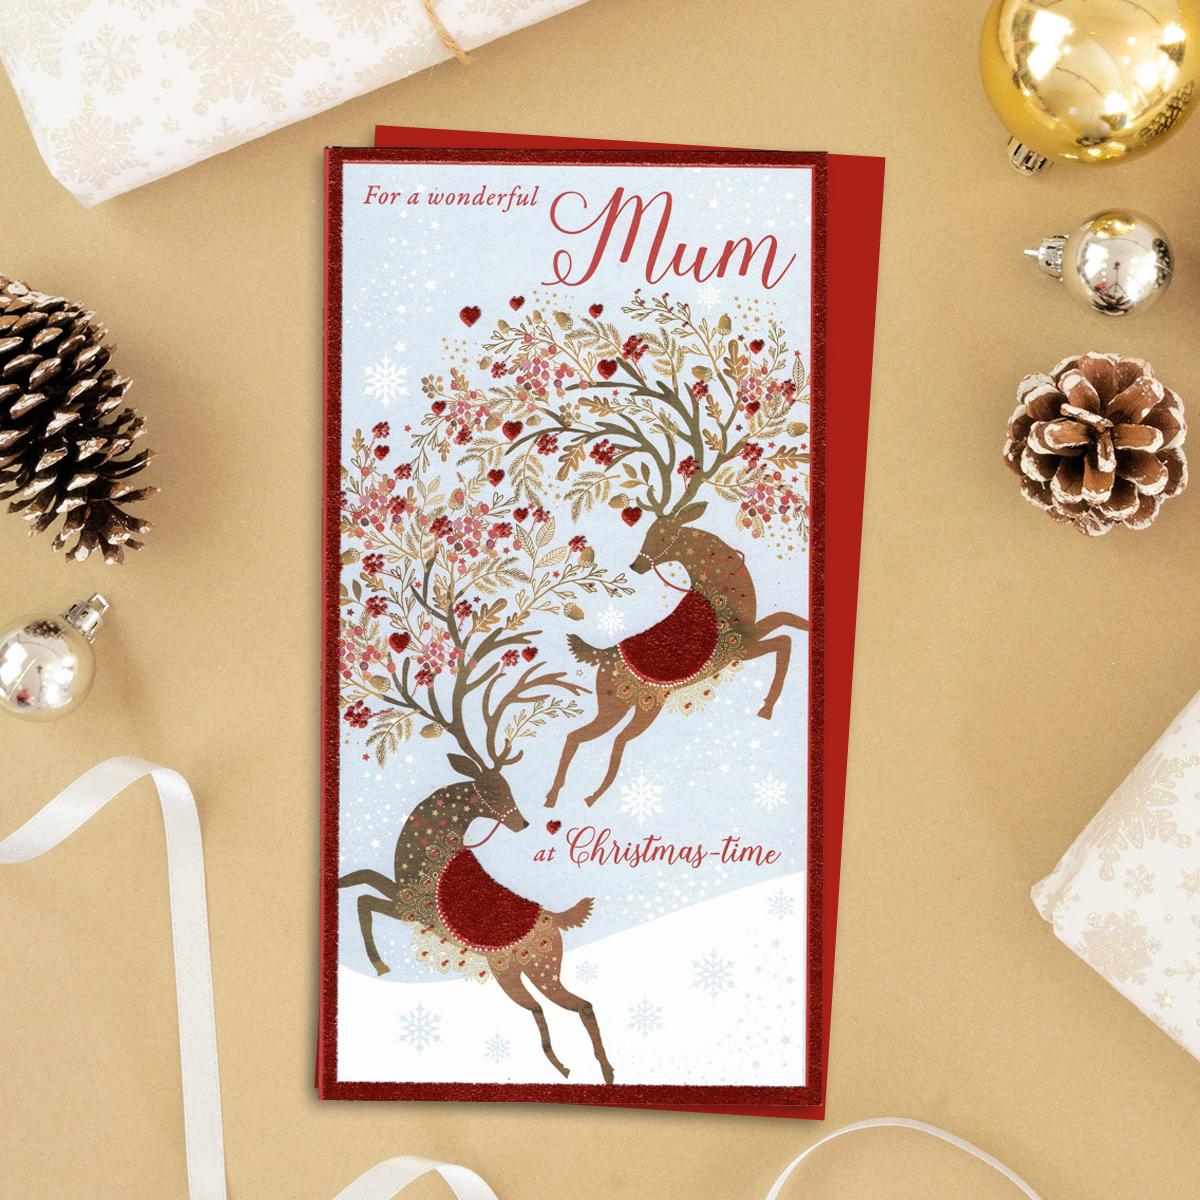 For A Wonderful Mum At Christmas Time Showing Two Beautiful Ornate Reindeers With Decorated Antlers. Finished With Red Glitter And Red Envelope